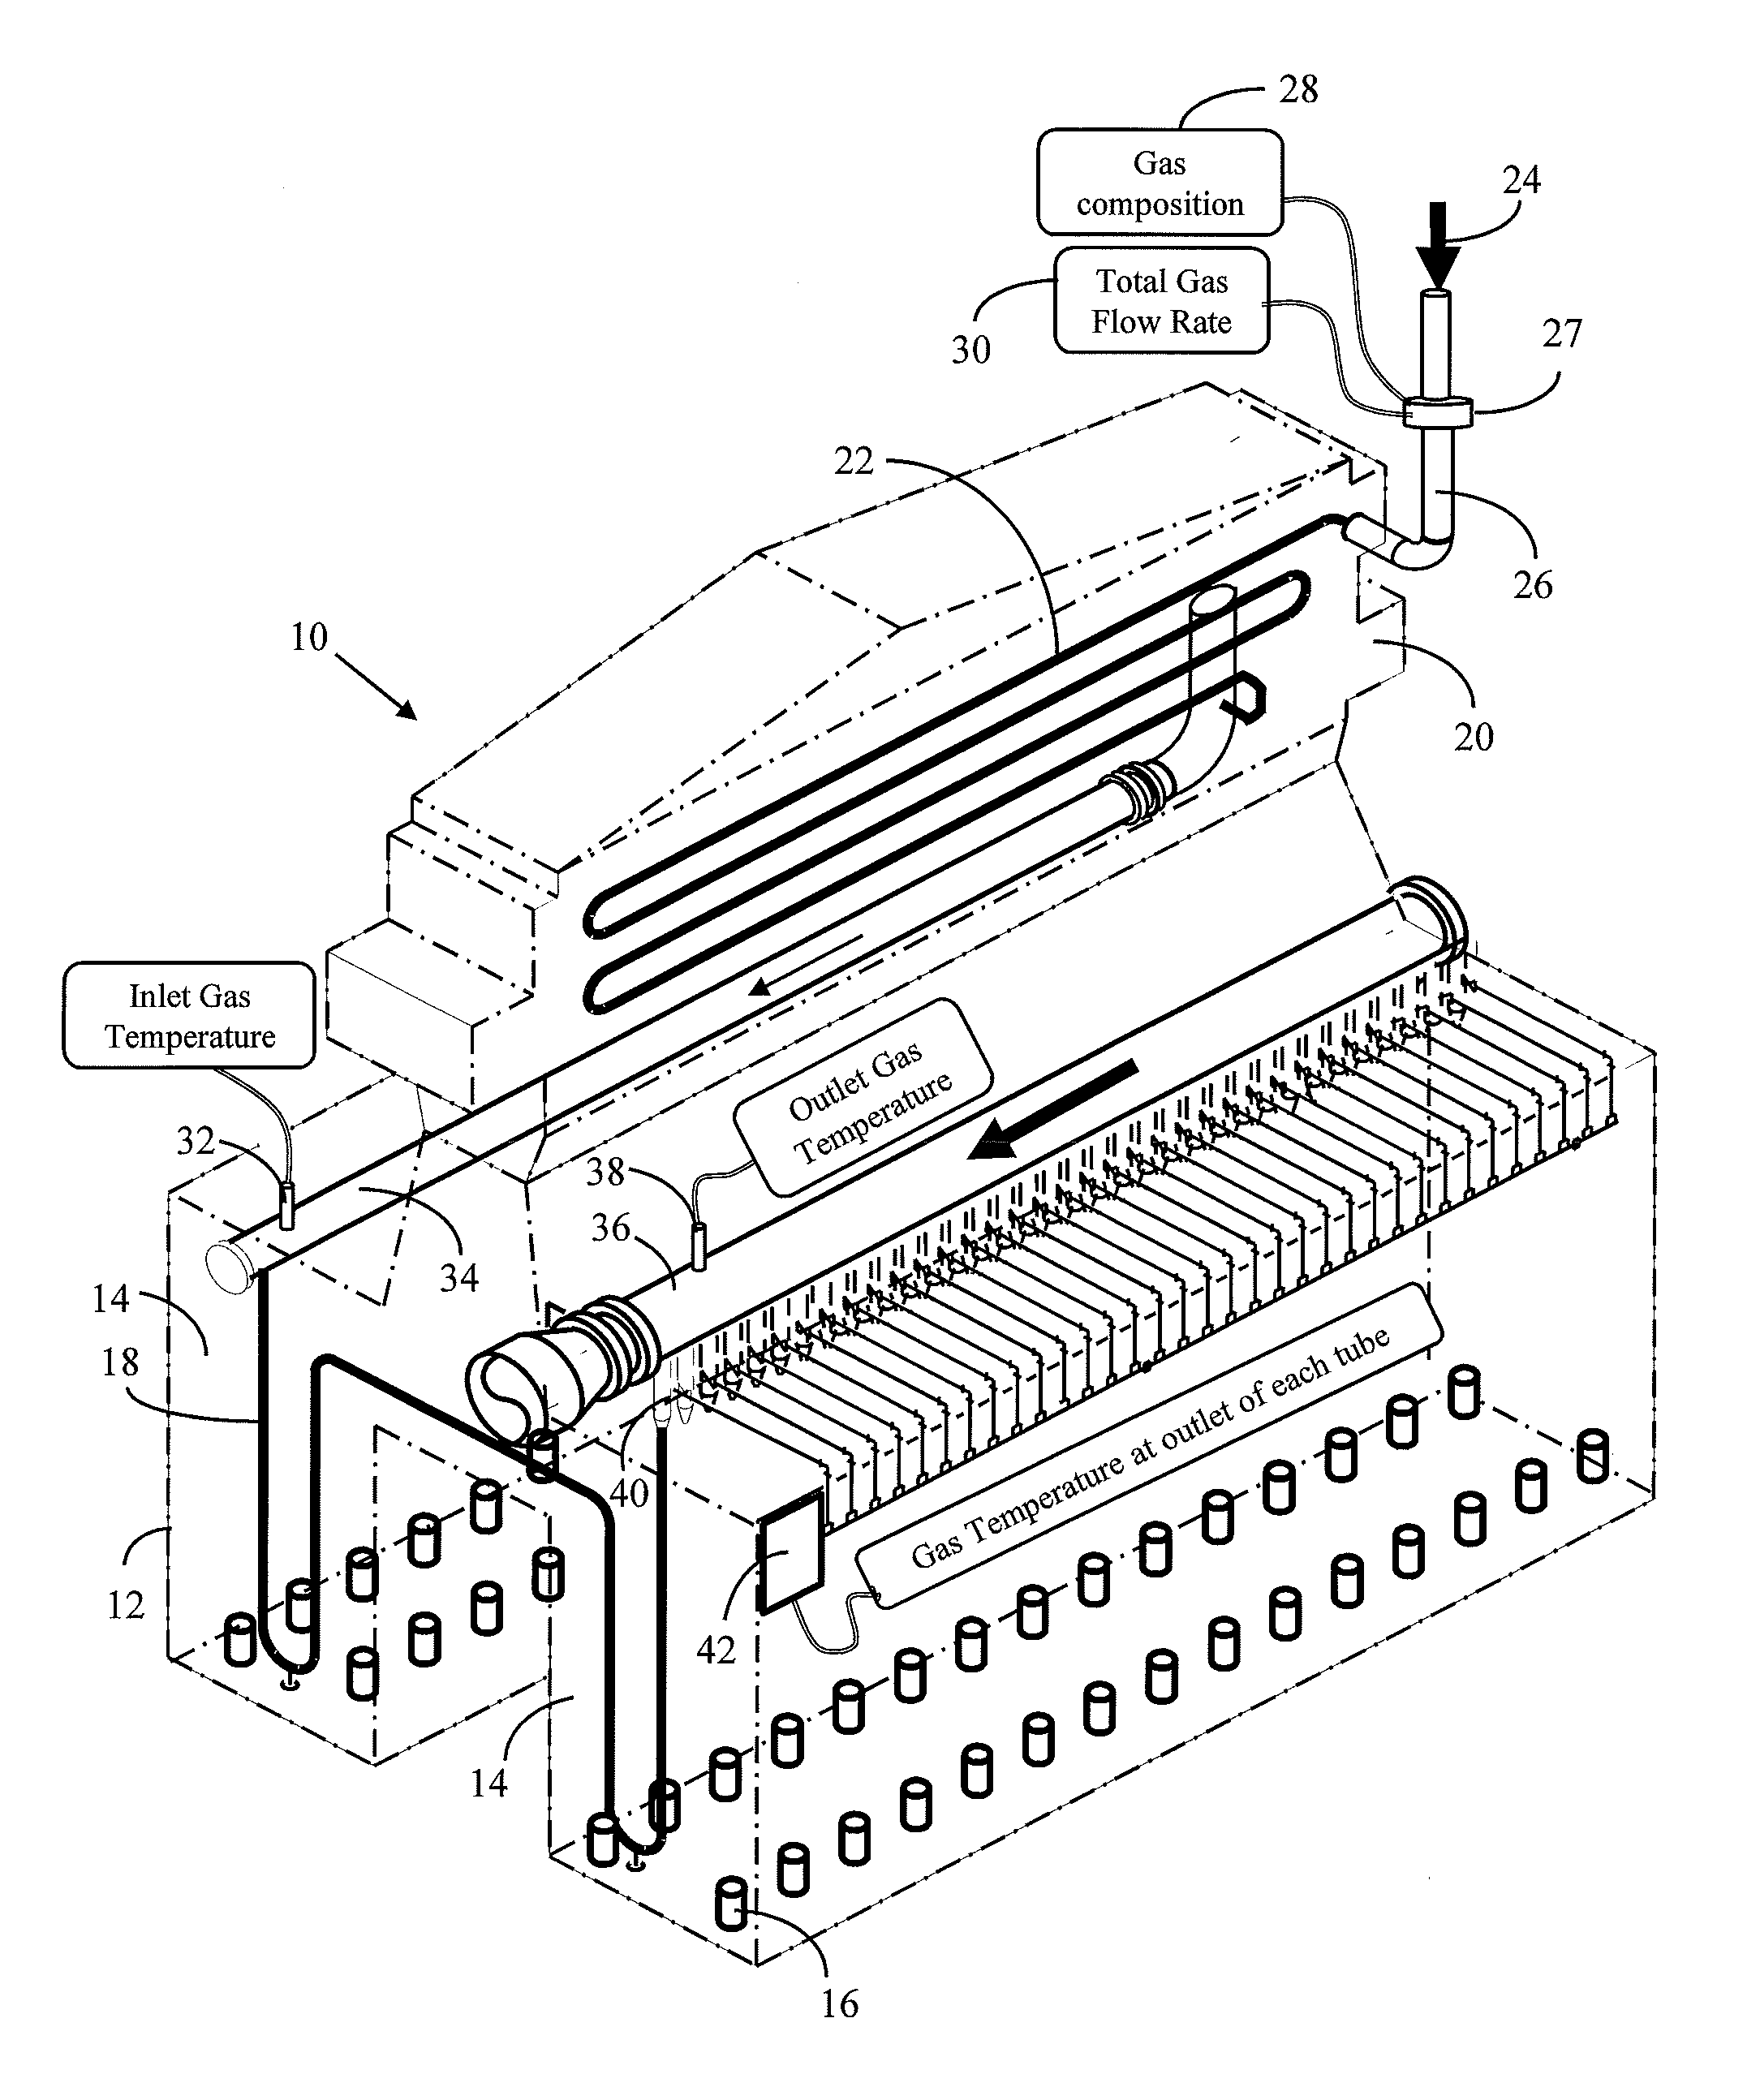 Method and apparatus for determining the skin temperatures of heat-exchange tubes in a fired tubular gas heater